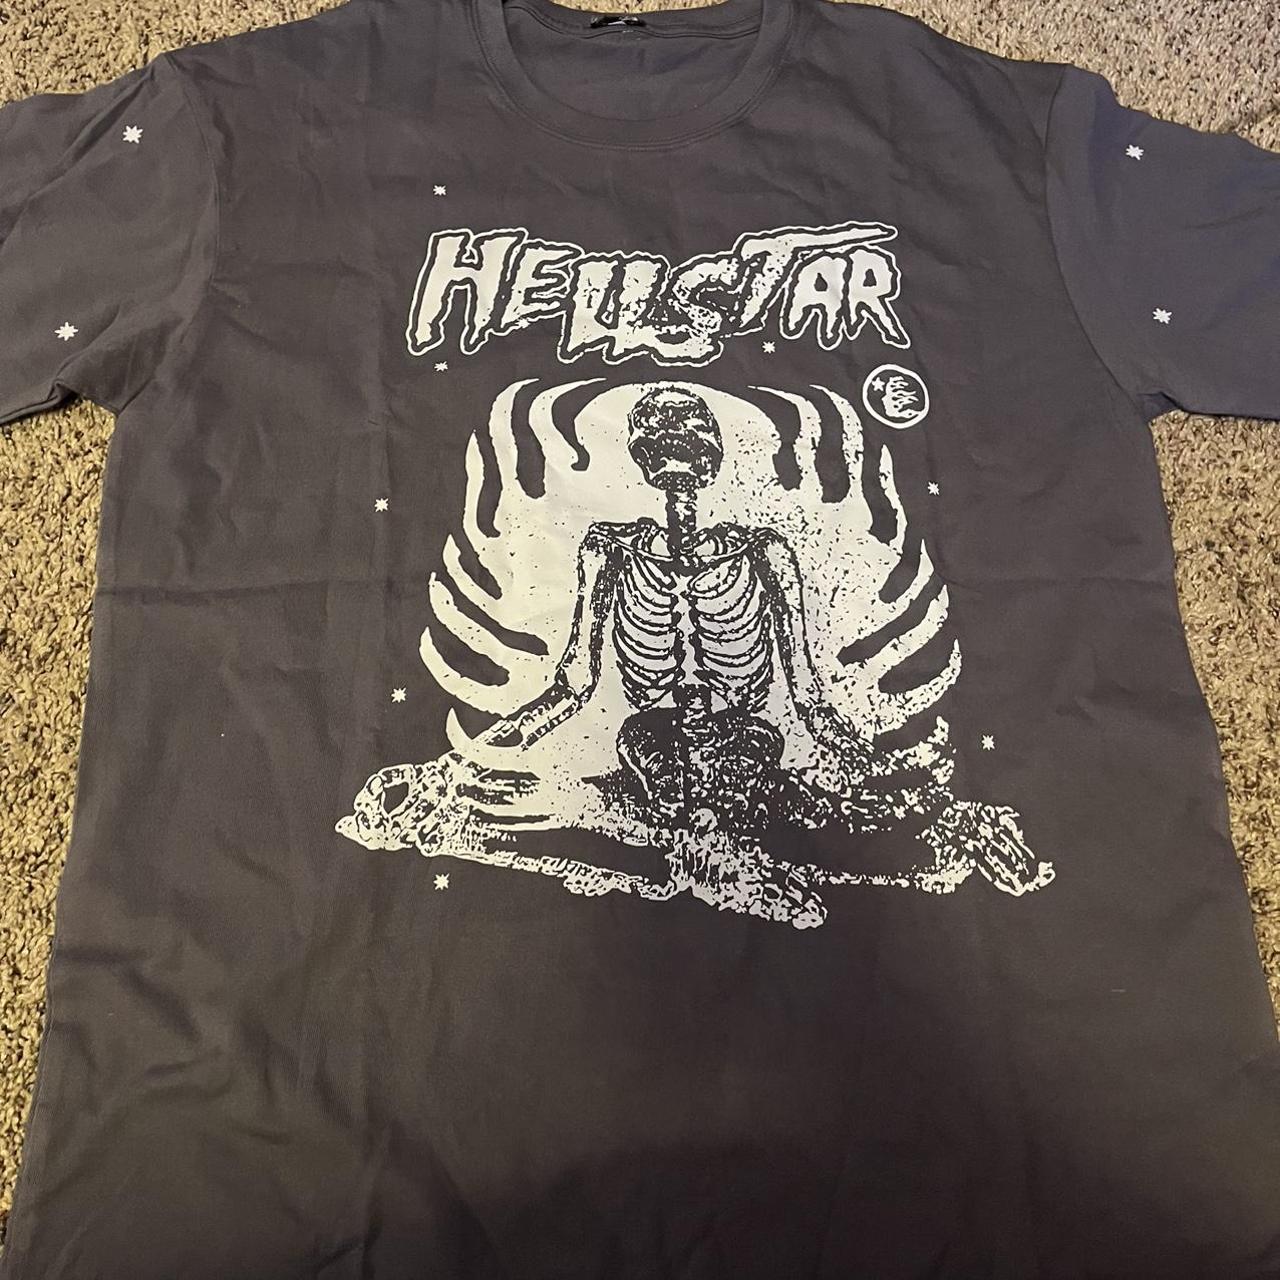 NO PAYPAL! Over sized hellstar shirt size large Worn... - Depop